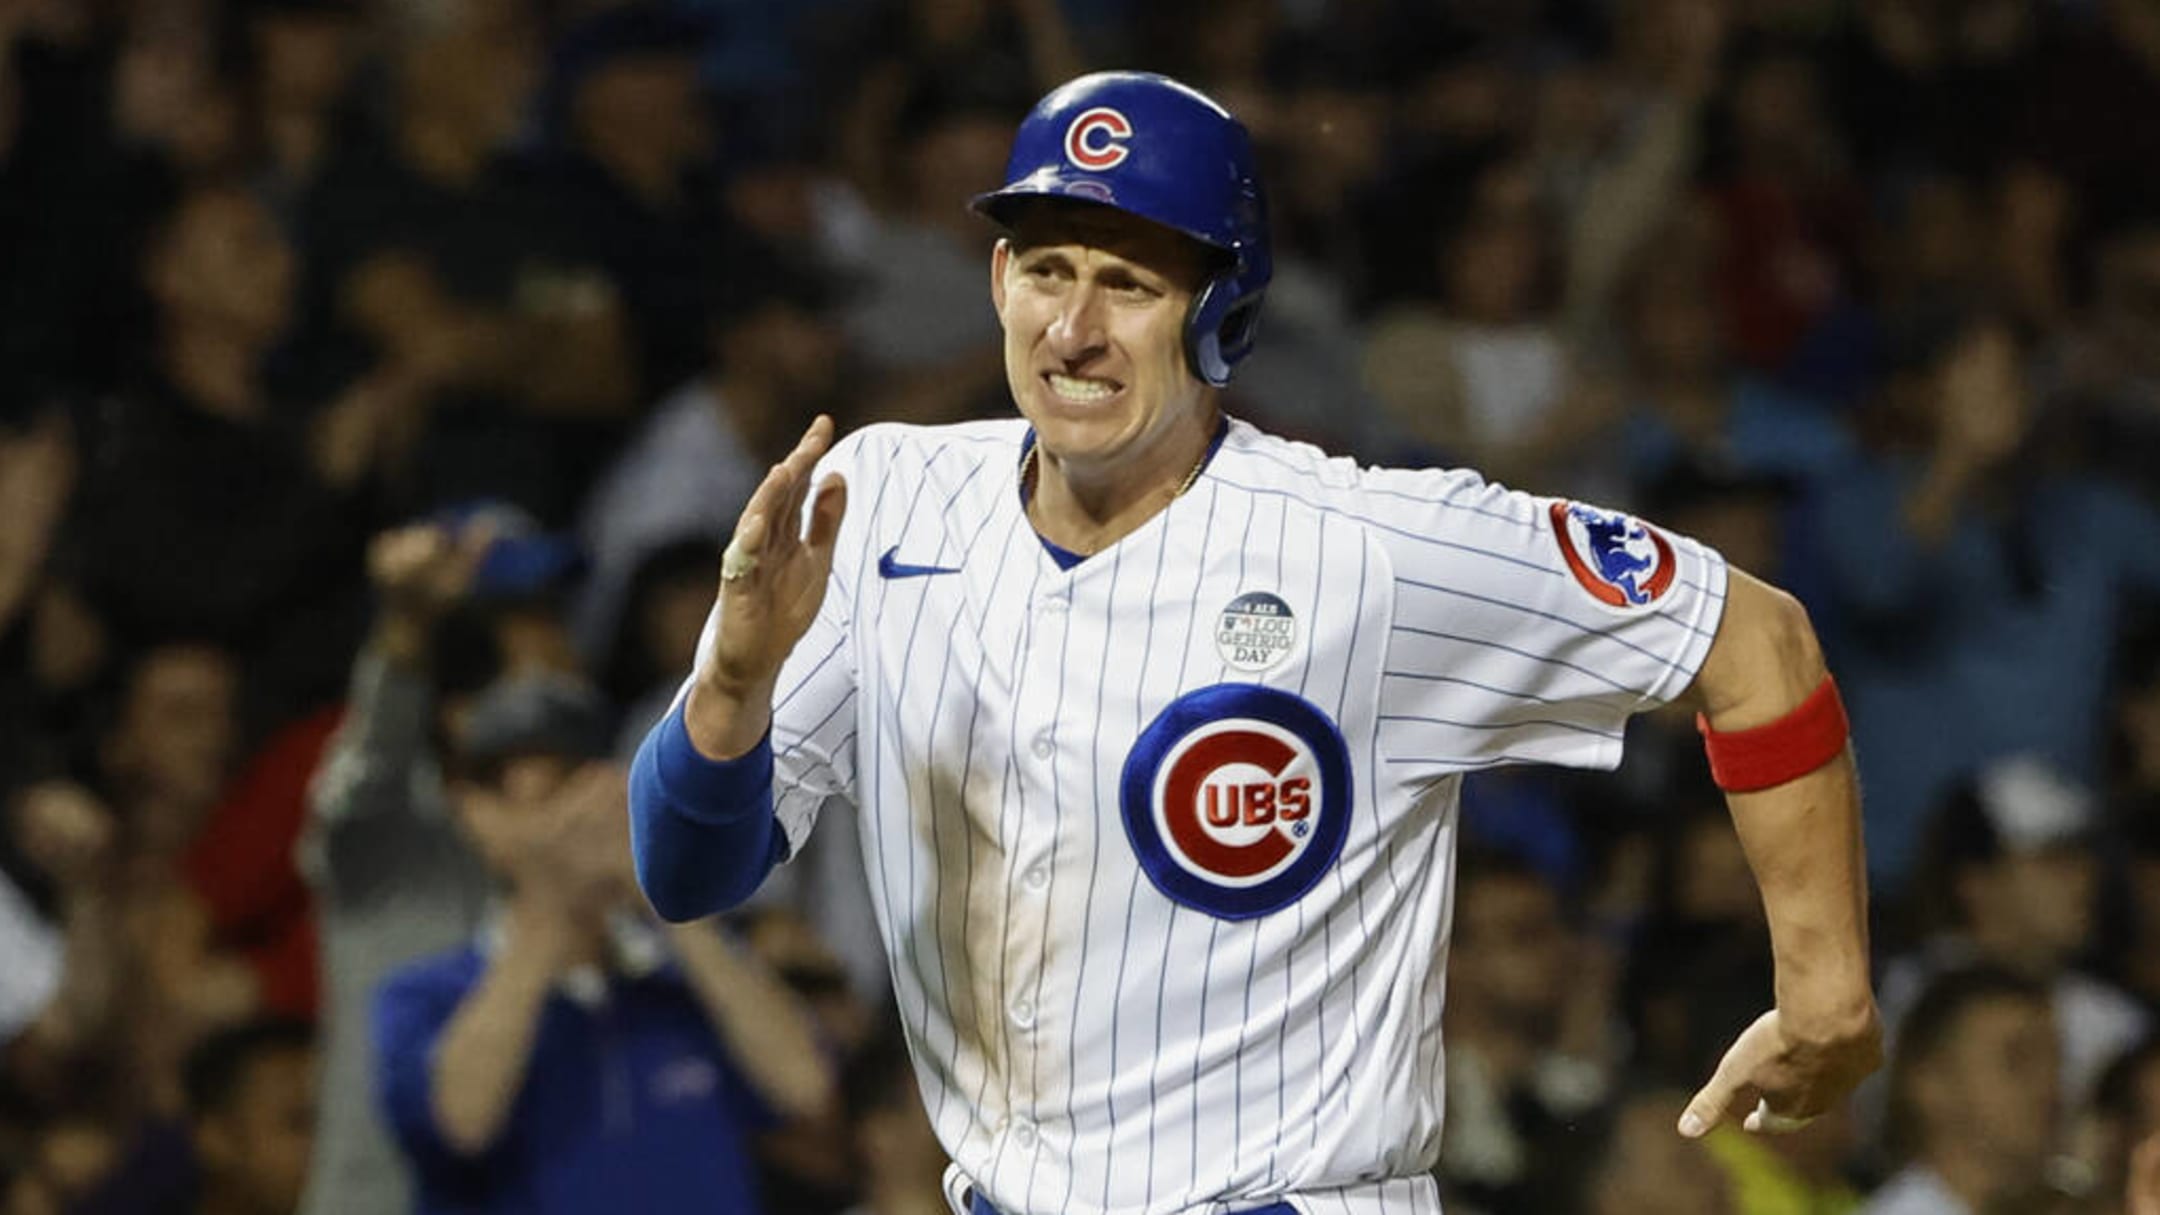 Cubs' Frank Schwindel pitched 9th inning vs. Cardinals – NBC